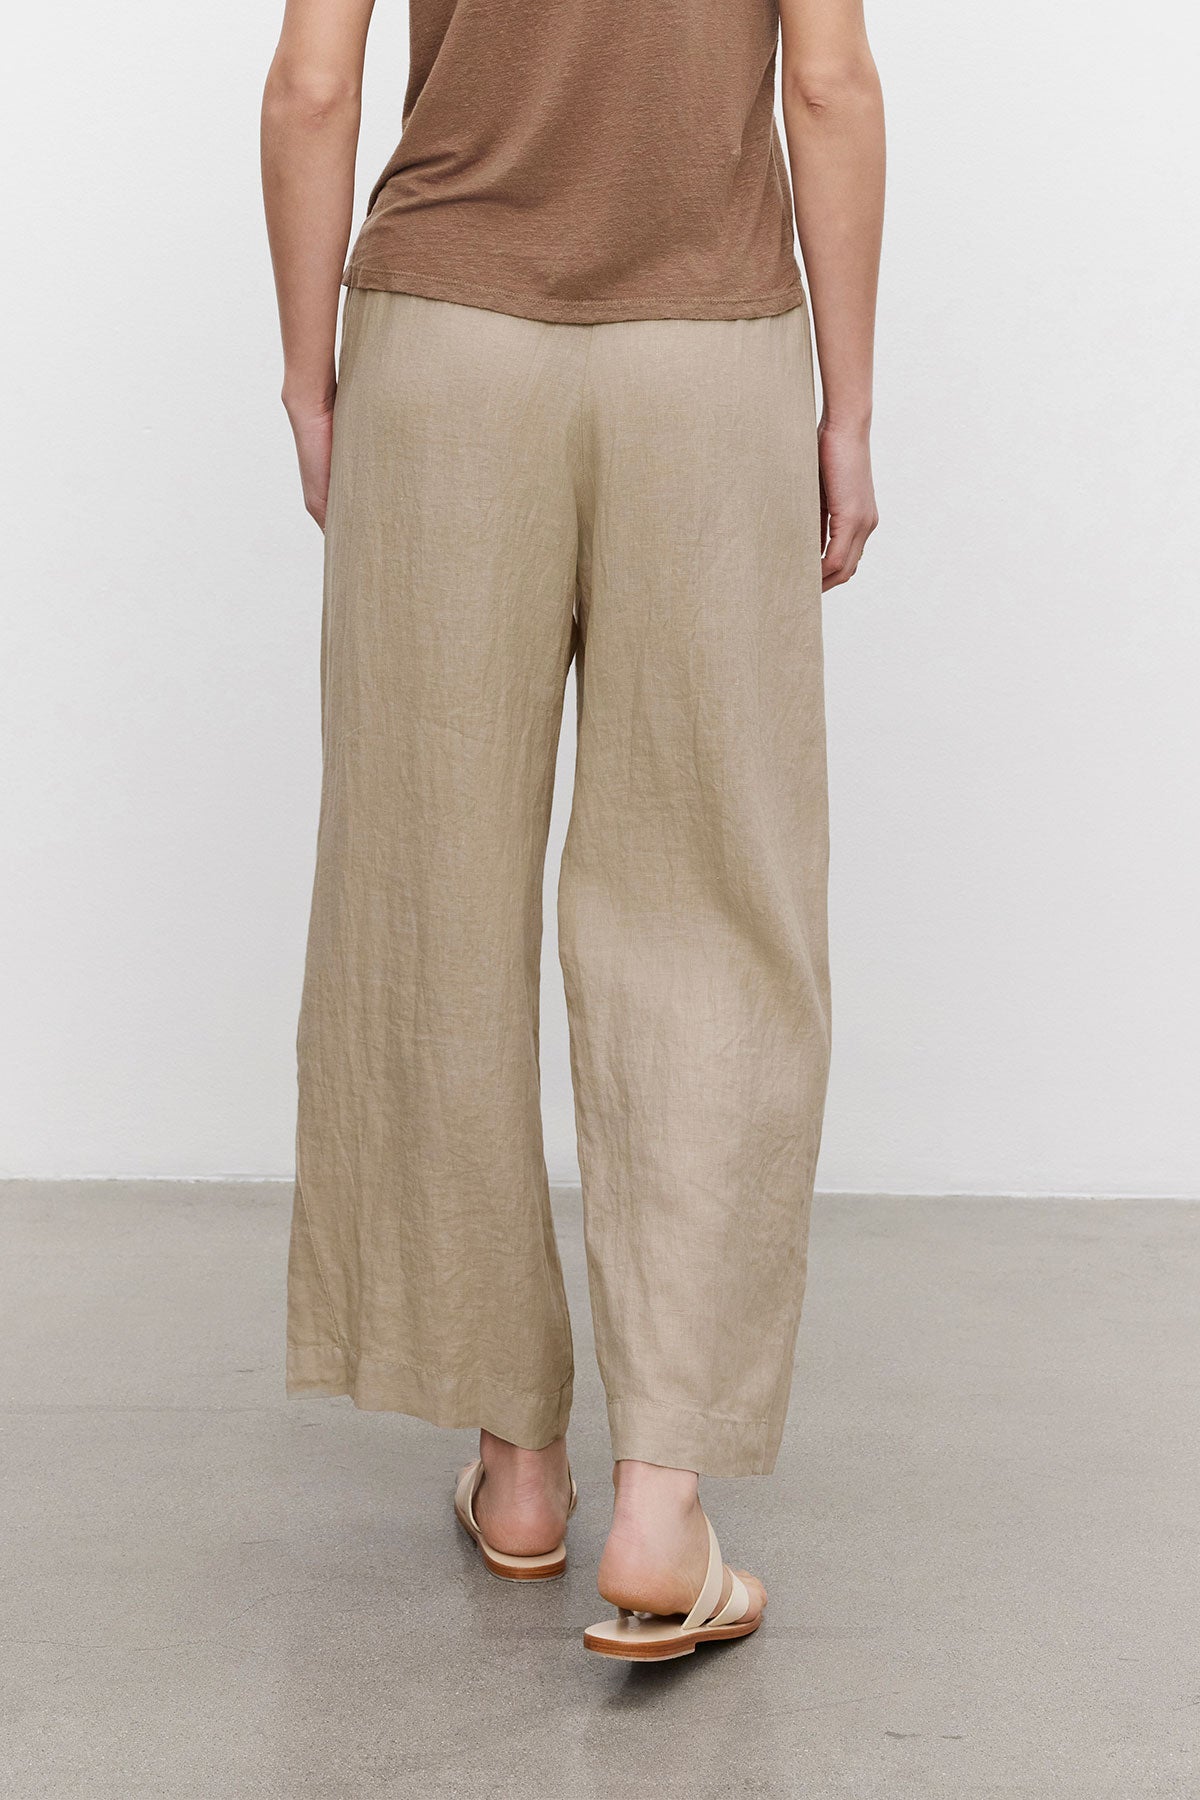   Rear view of a person wearing Velvet by Graham & Spencer LOLA LINEN PANTS and tan sandals, standing in a room with a white background. 